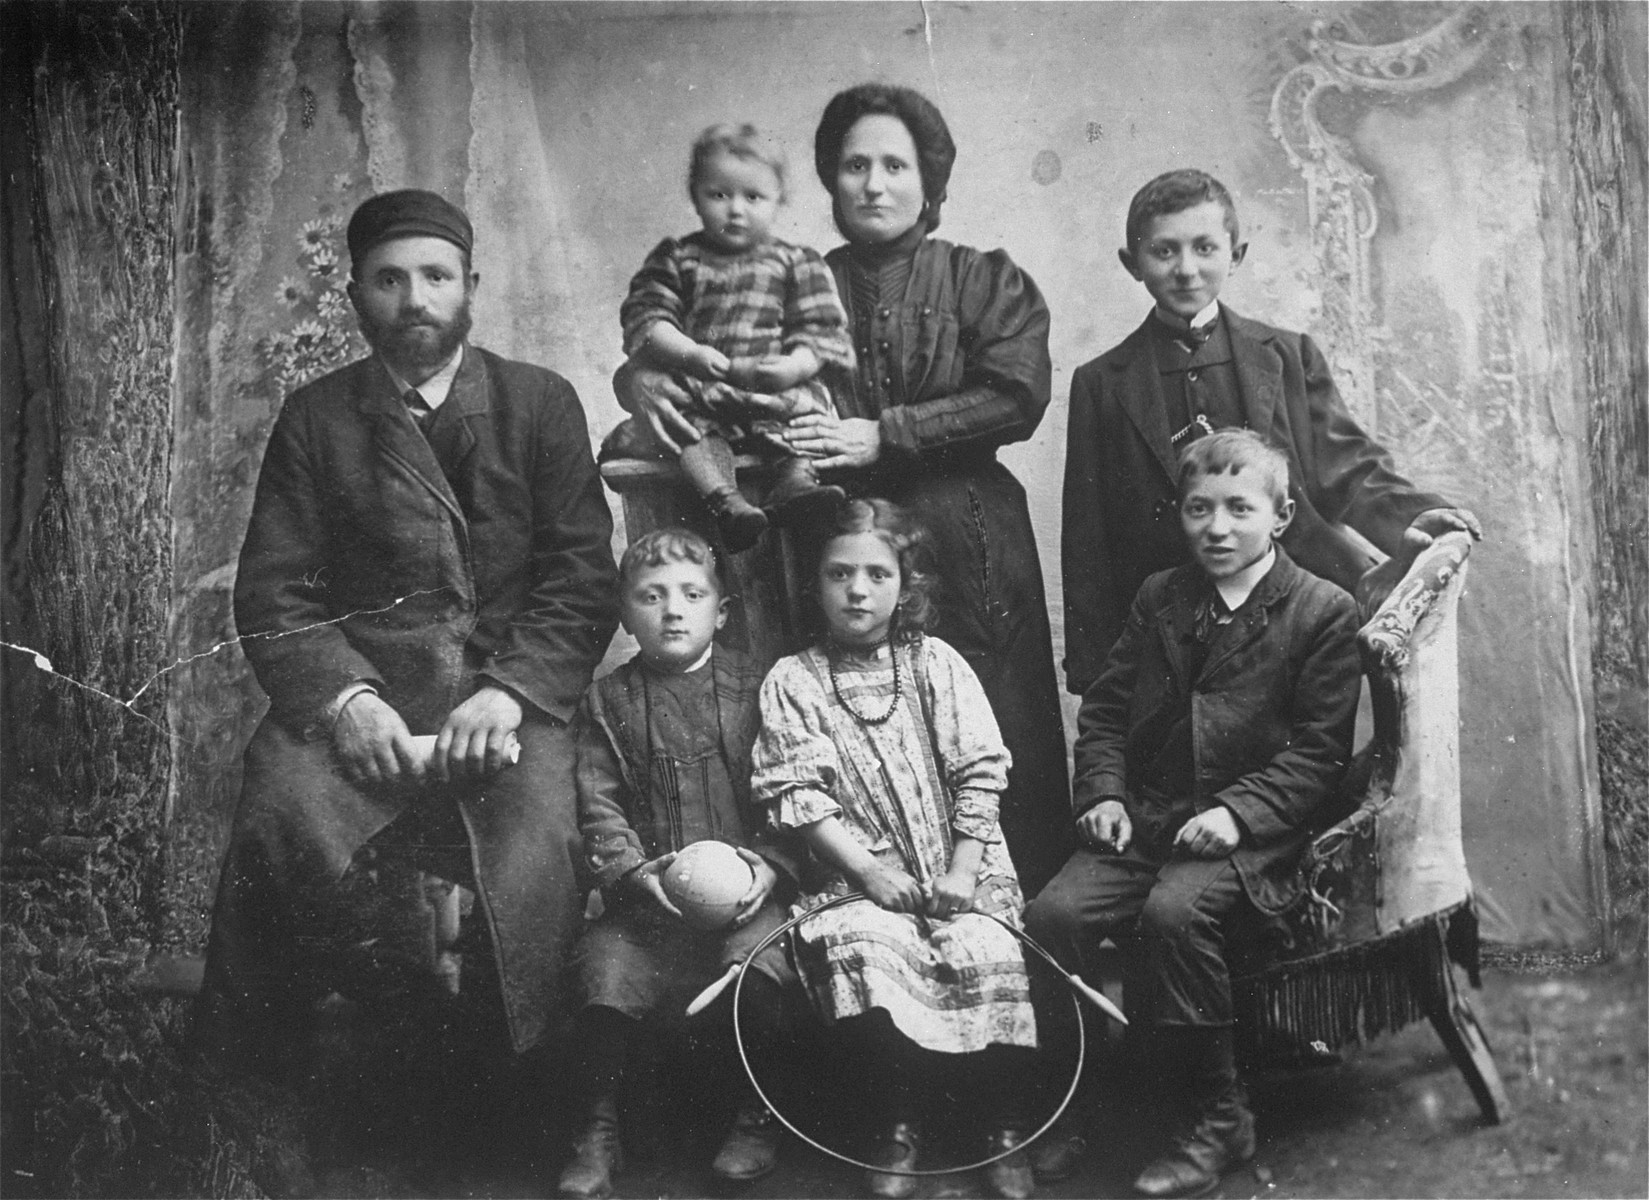 Family photograph of Samuel and Rachel Weiss and their five children: Sarah, Regina (donor's mother), Max, David and Adolph.

The Yiddish inscription on the back reads: To Elke Malche Weiss: Dear sister, I don't know where you are. Send me your address. Sent by your brother.
Samuel Weiss died before the war, Rachel and Sarah perished in the Holocaust. Max, David and Adolph immigrated to the U.S via Argentine in the early 1940's. Regina survived Auschwitz and Dachau, came to the U.S after the war, where she met and married Jack Roth.